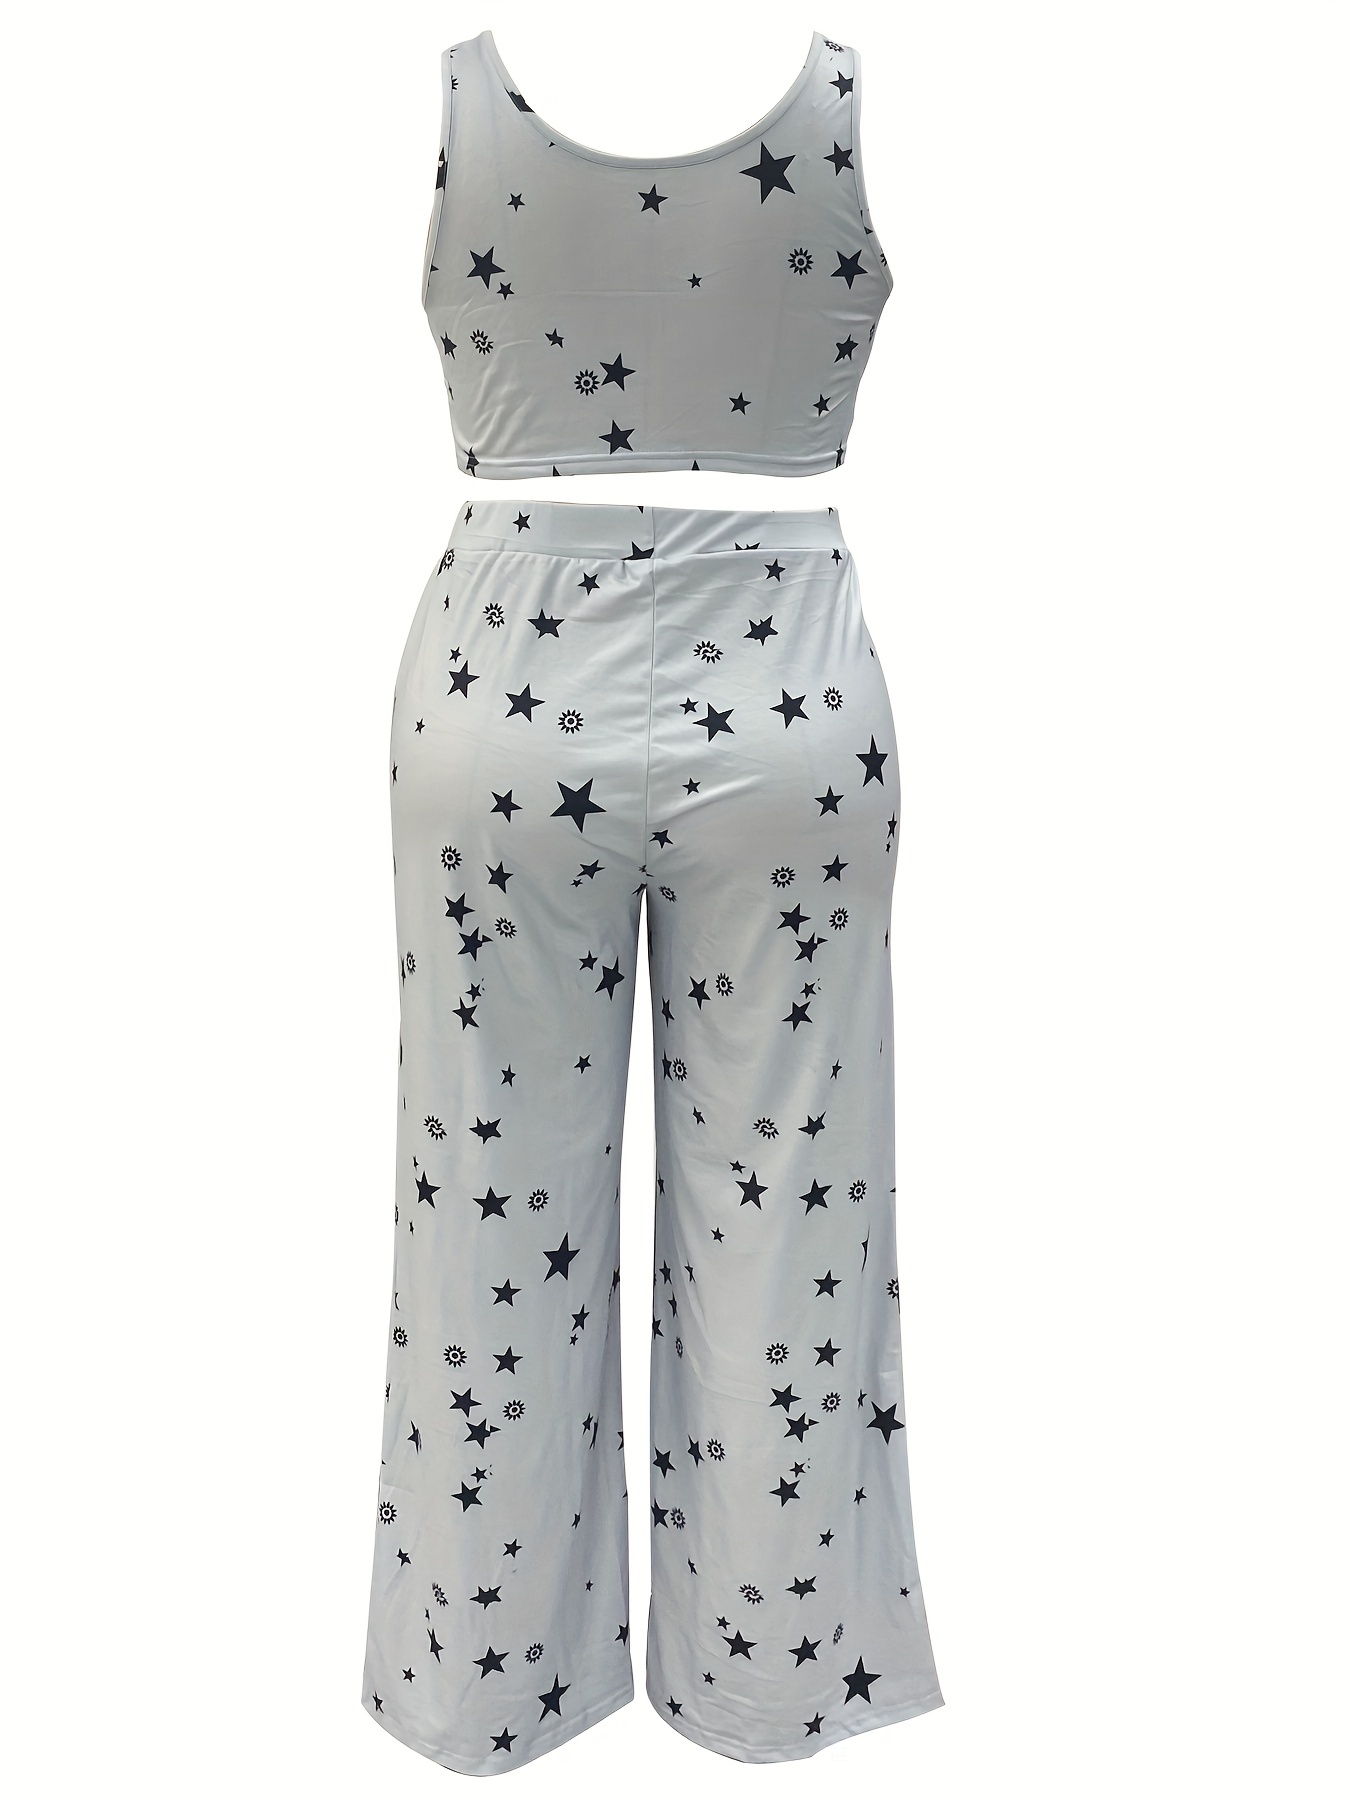 Plus Size 2-Piece Crop Top and Pants Set in Black and White Stars